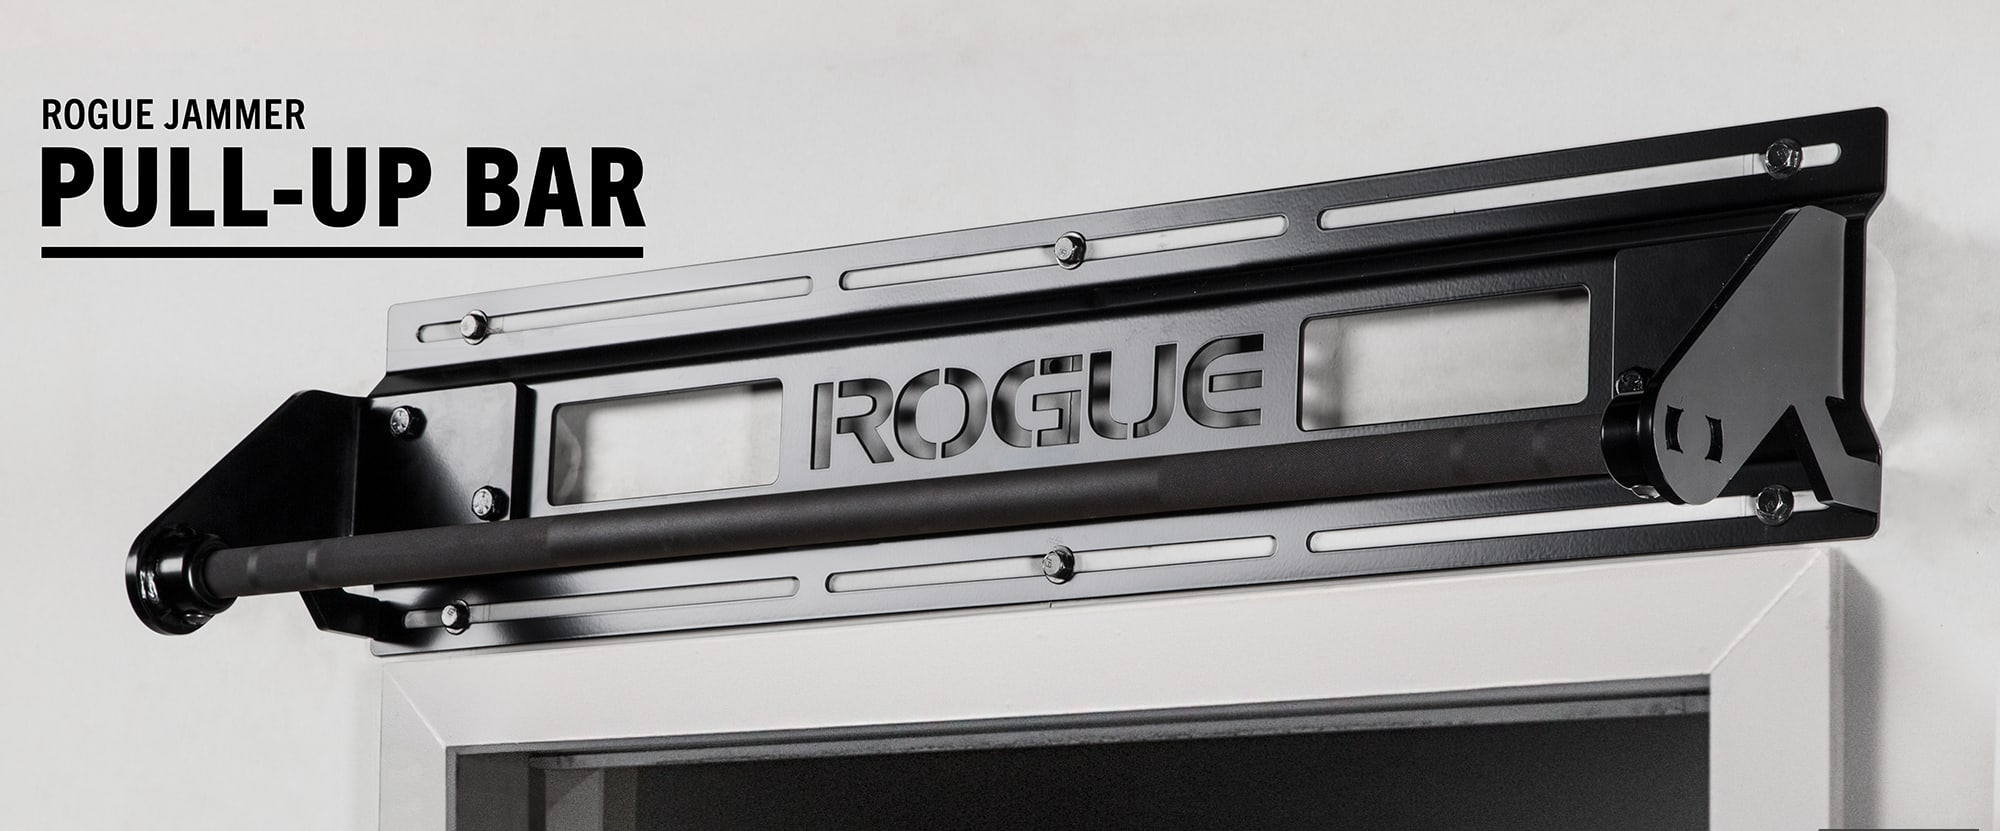 Rogue Jammer Pull-up Bar | Rogue Fitness Canada